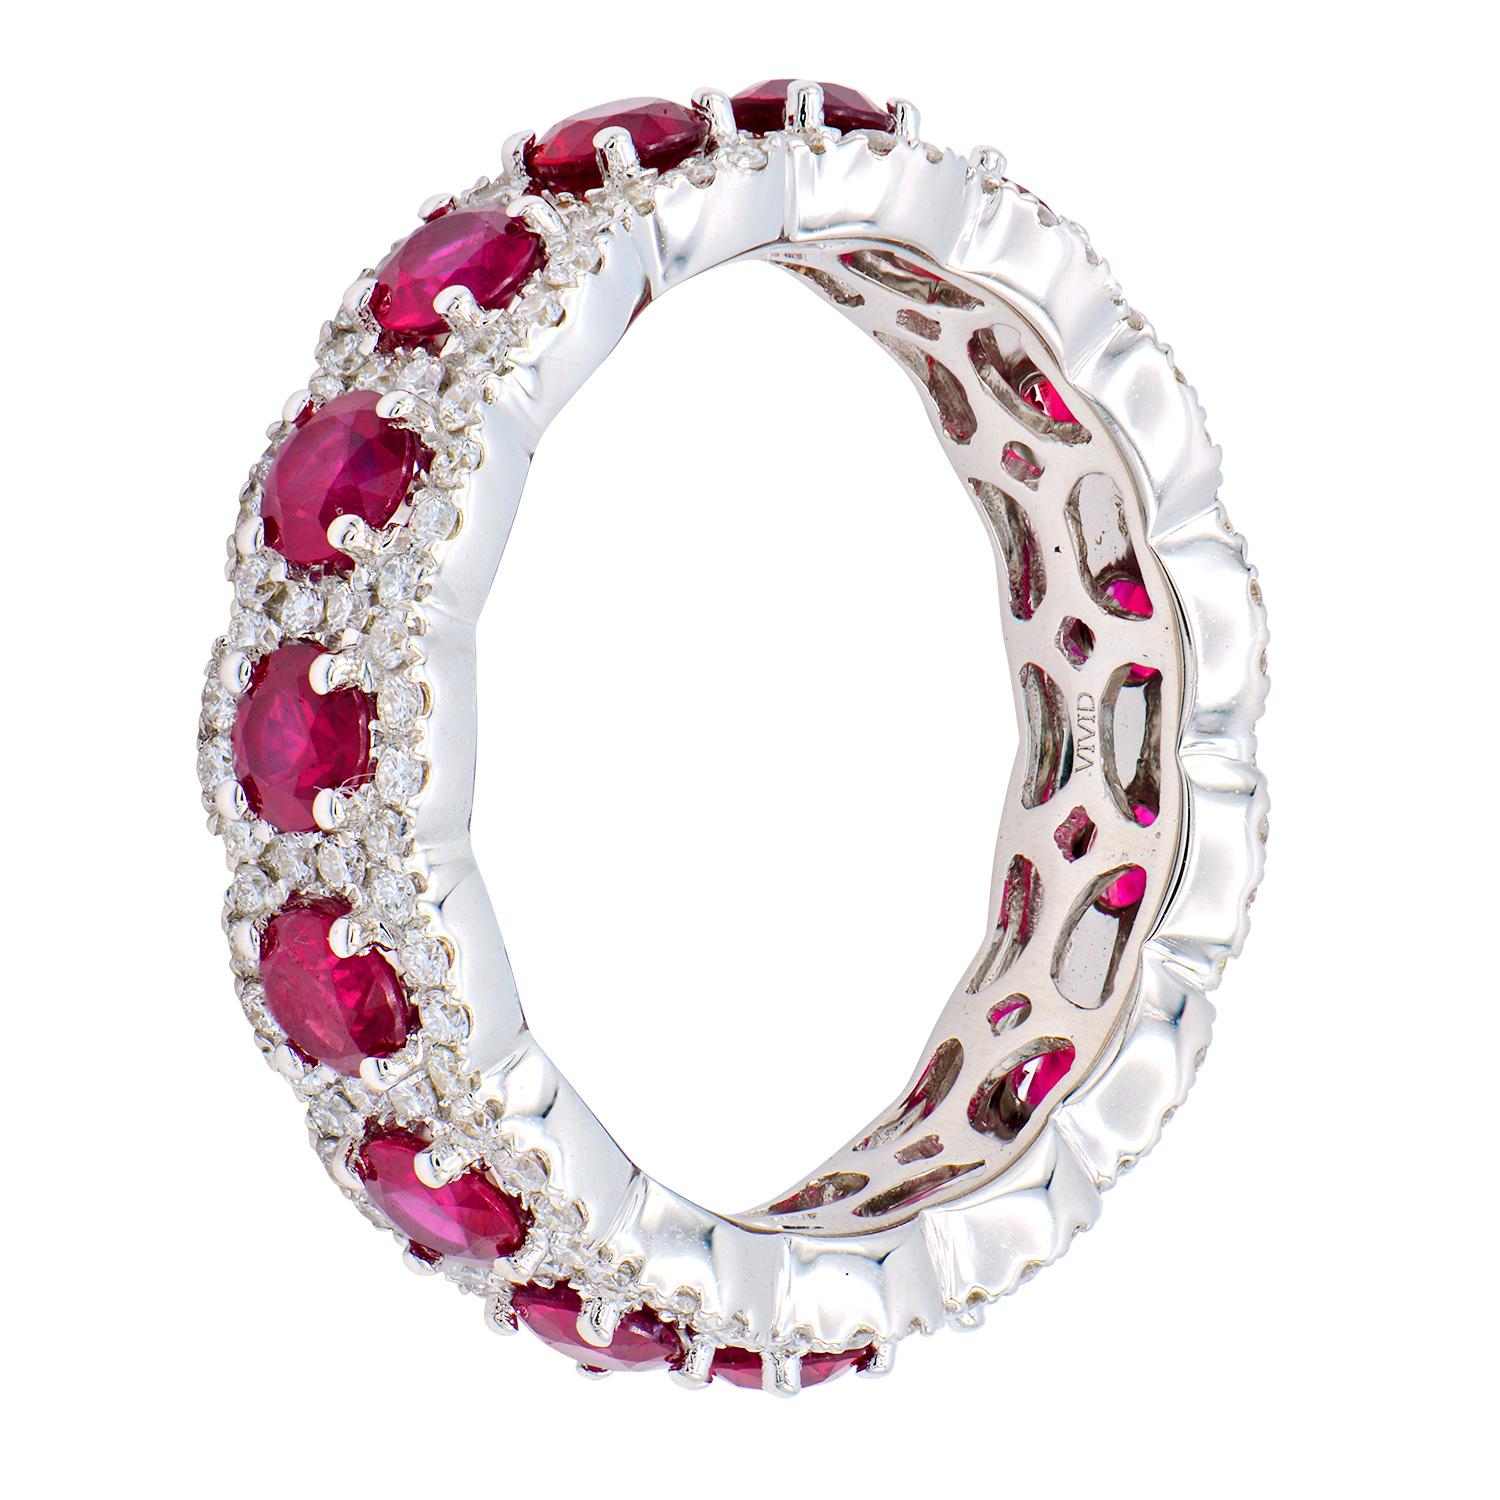 This Ruby and Diamond eternity band is a full circle of beauty and elegance. This band contains 15 deep red rubies totaling 2.57 carats surrounded by 150 round VS2, G color diamonds totaling 0.66 carats. They are set in 4.3 grams of 18 karat white